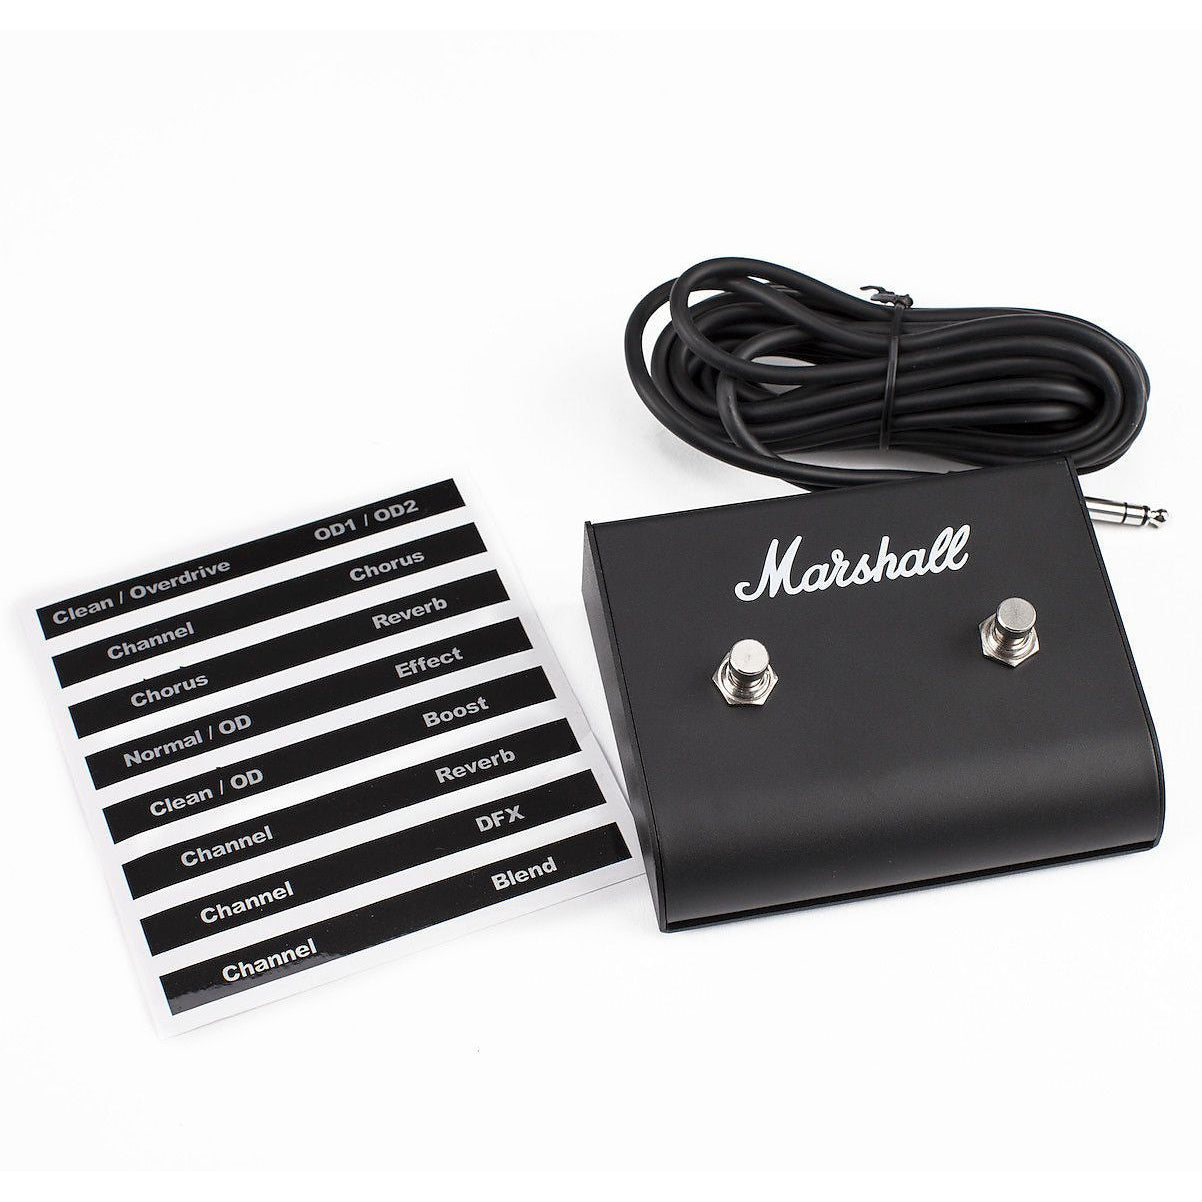 Marshall PEDL91004 2-Way Guitar Amplifier Footswitch